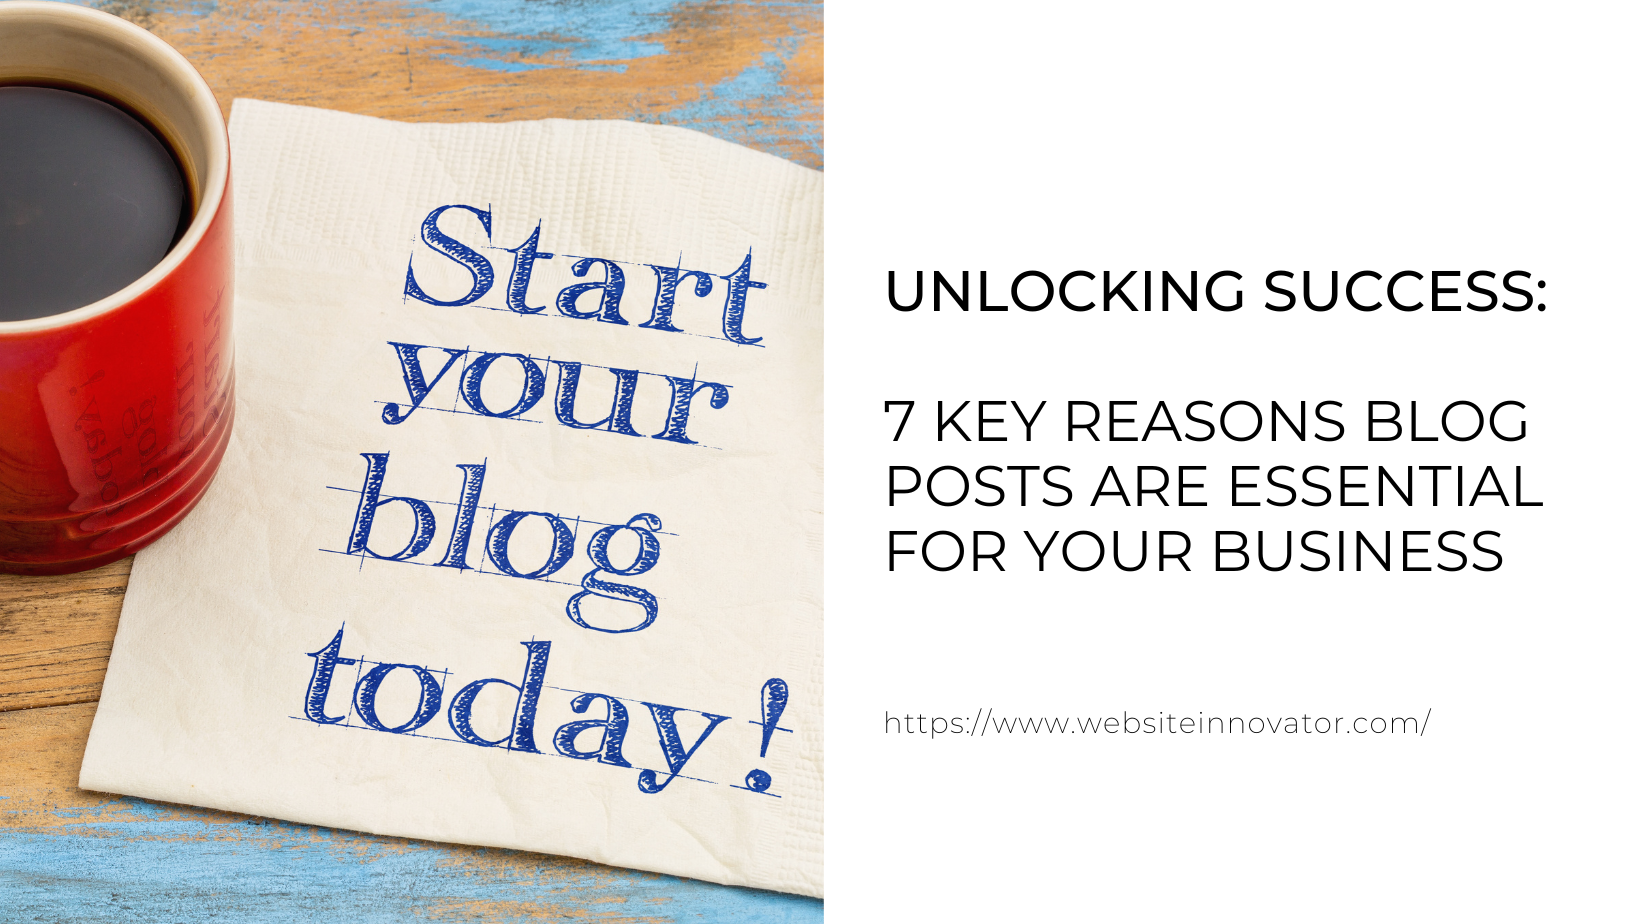 Unlocking Success: 7 Key Reasons Blog Posts Are Essential for Your Business